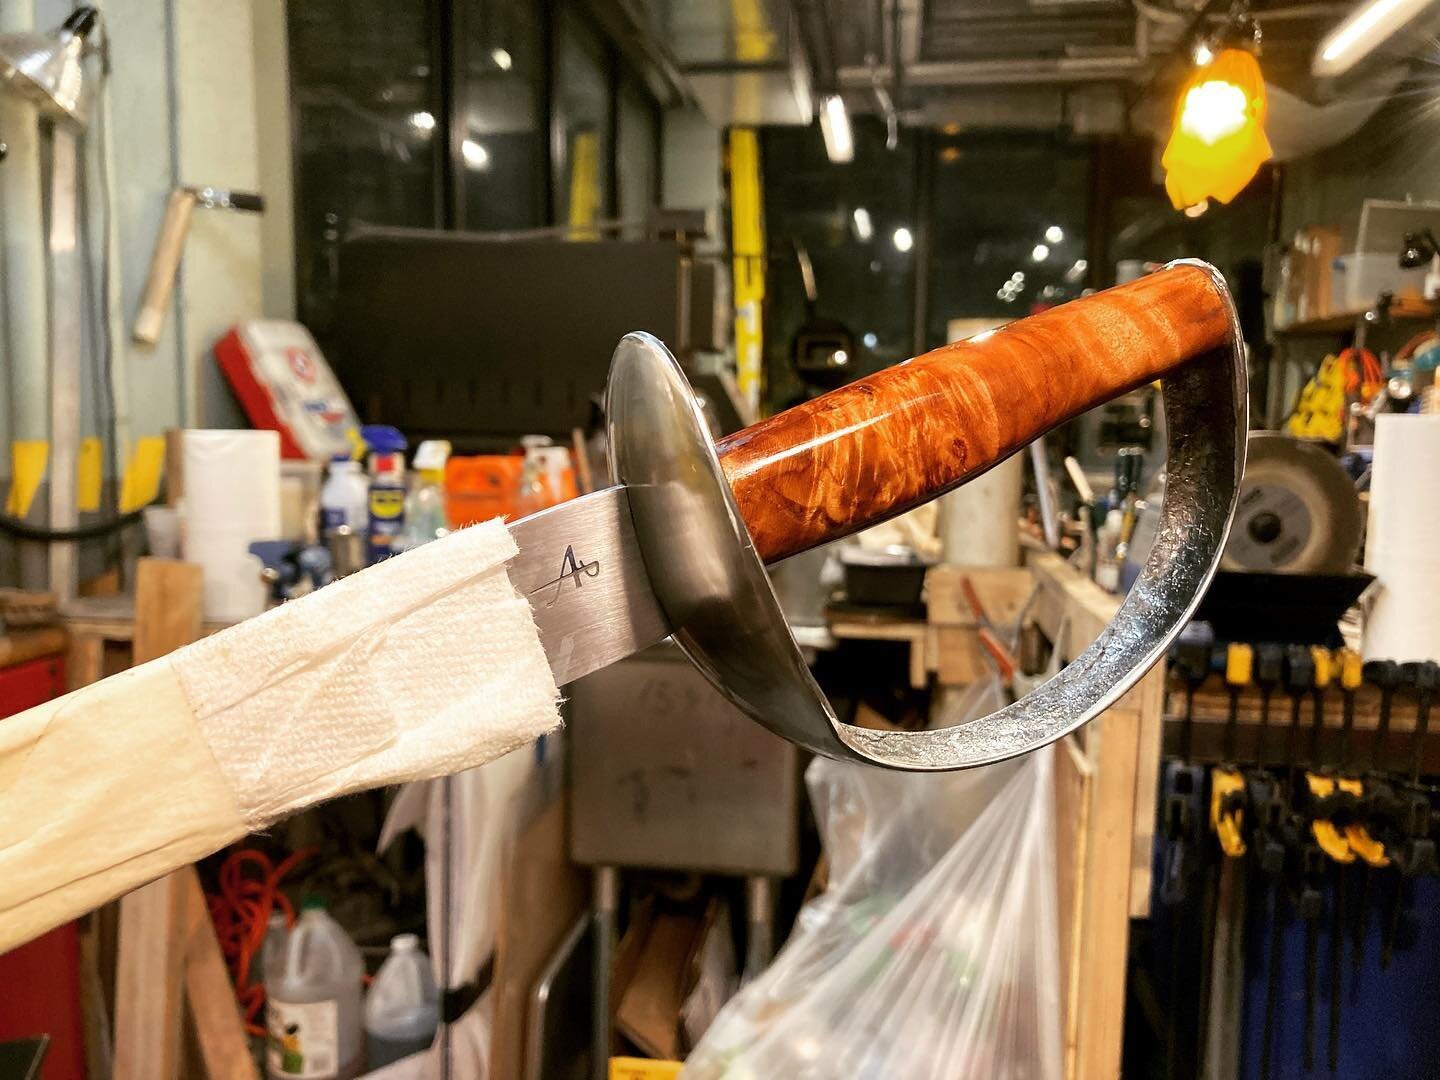 Sneak peek of this champagne sabre while it dries. Saturday when I get back to the forge it gets packed up and shipped out. Someone&rsquo;s wine bar is going to have a lot of fun sabering champagne bottles.

#bladesmith #blacksmith #swordsmith #knife